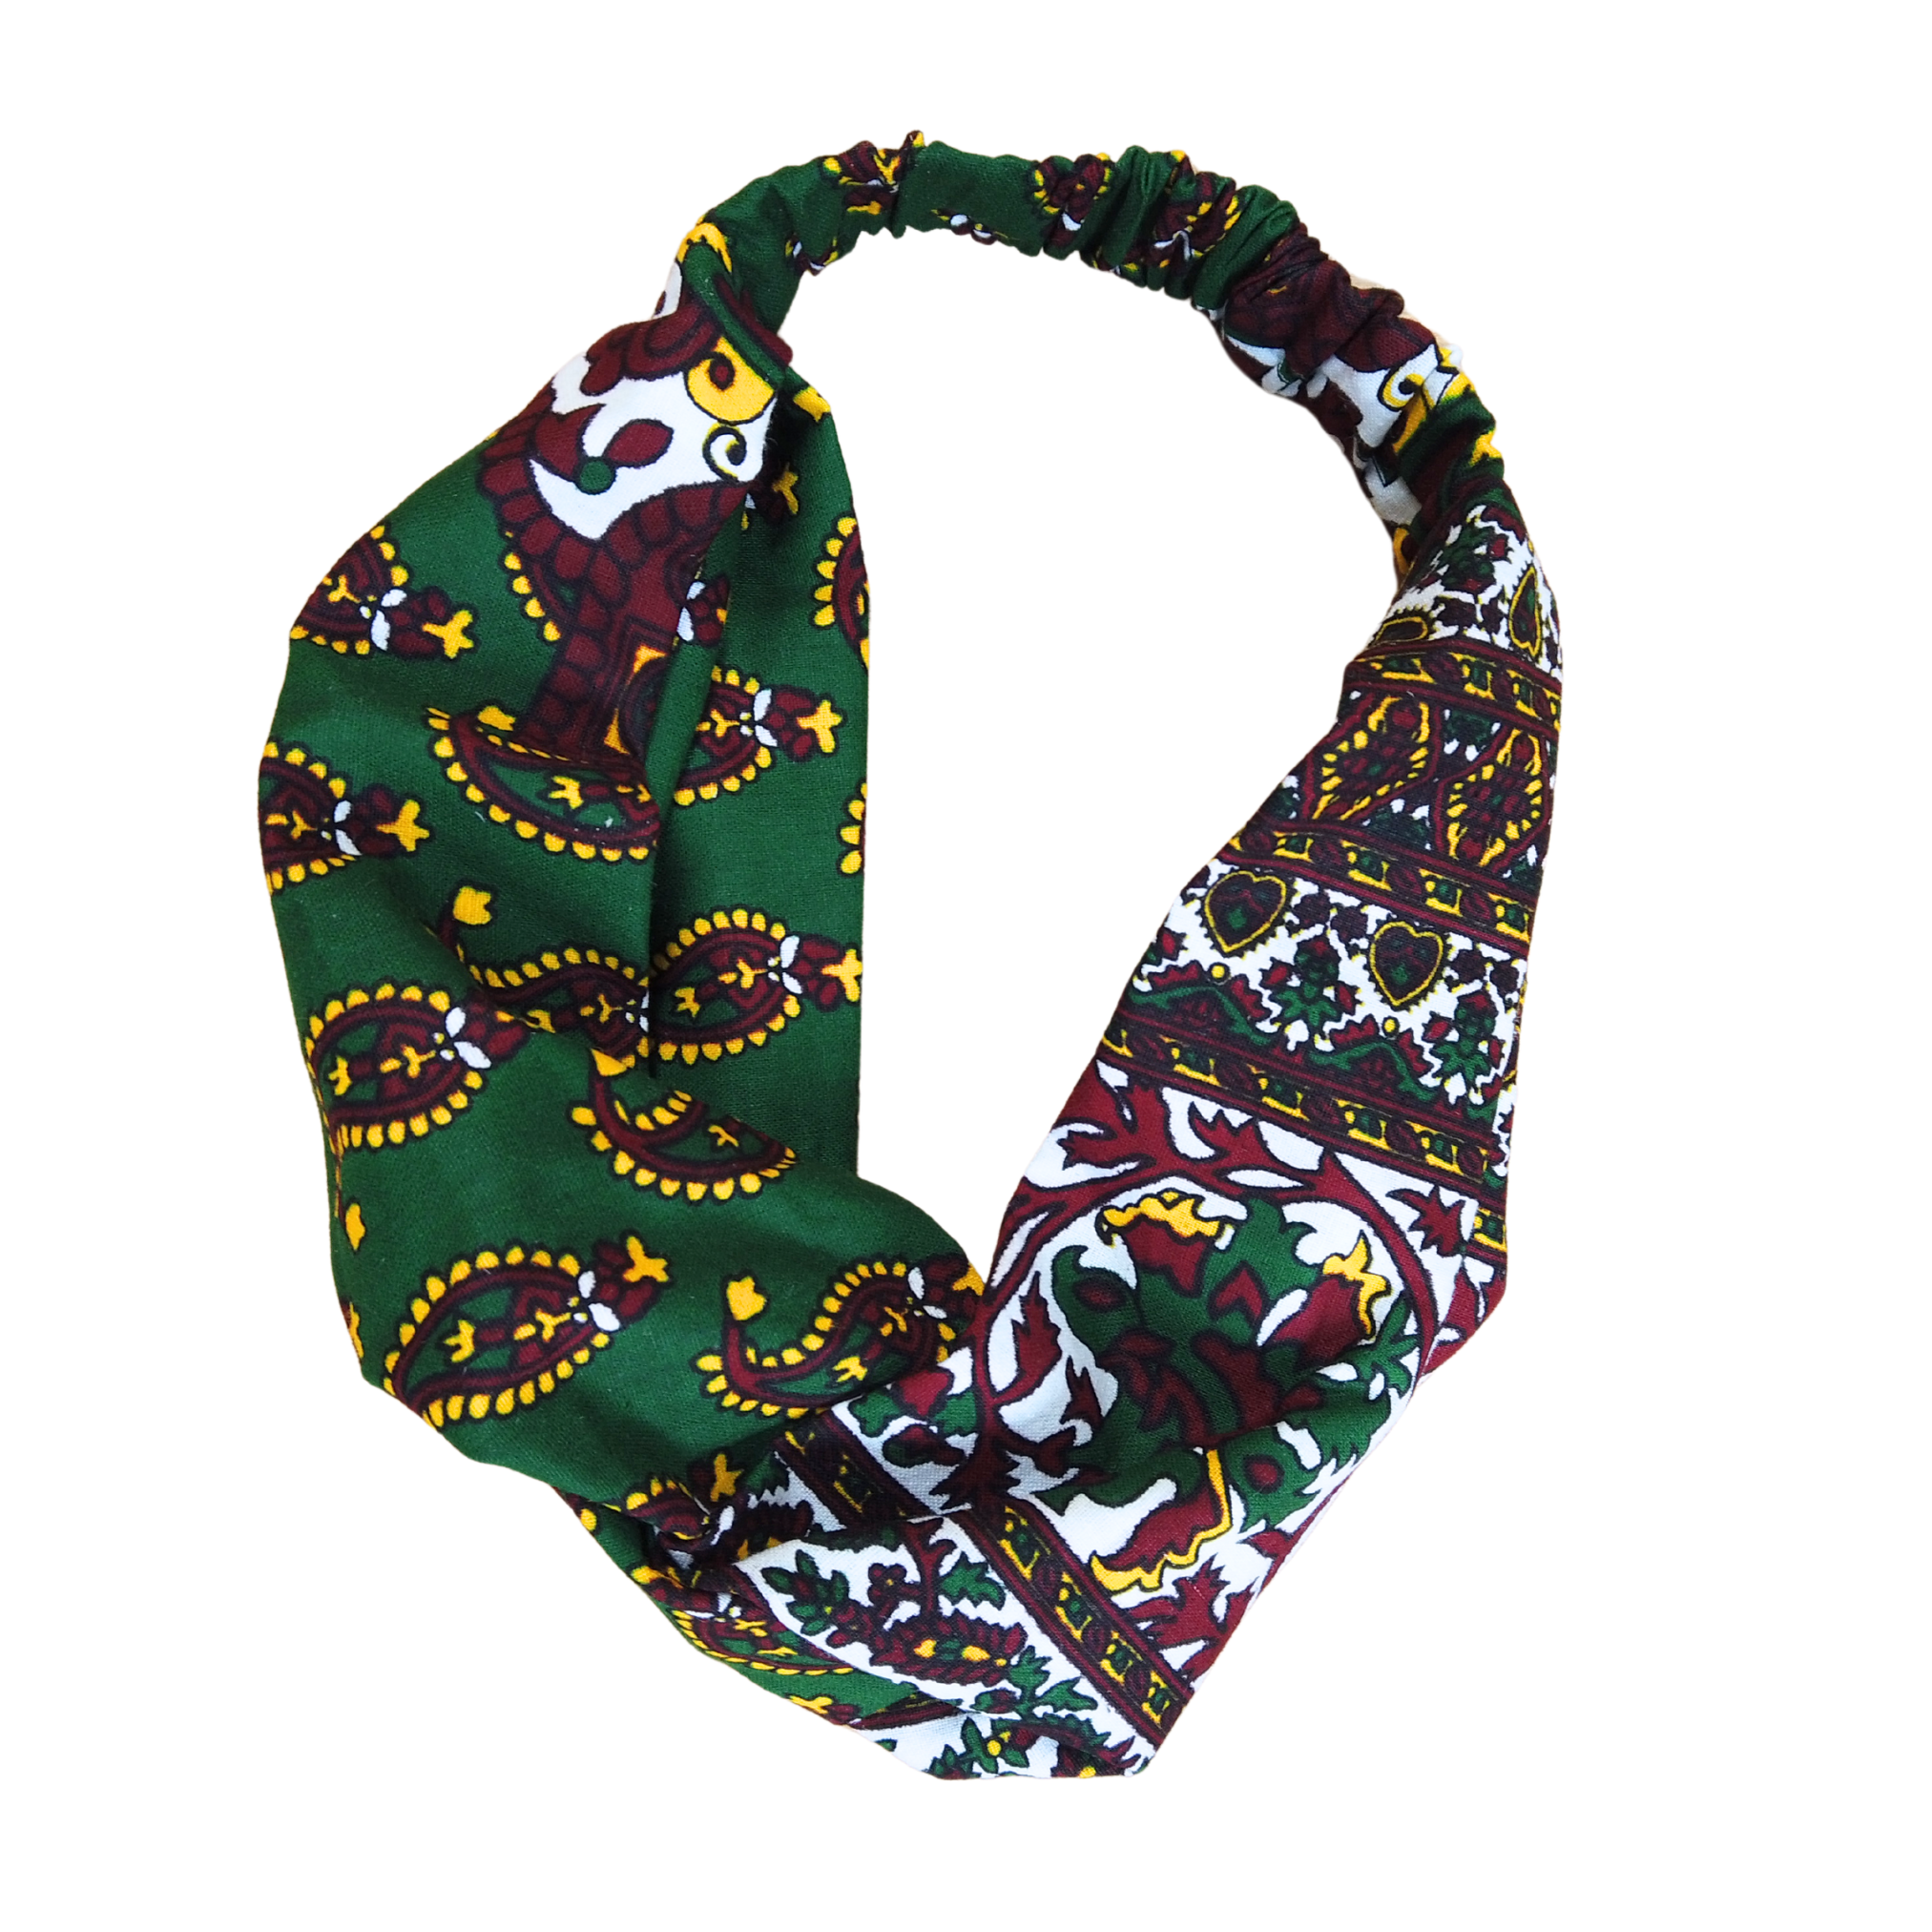 African Print Headband Ankara Handmade Top Knot Green Cotton Elasticated Stretchy Wide Large by Dovetailed